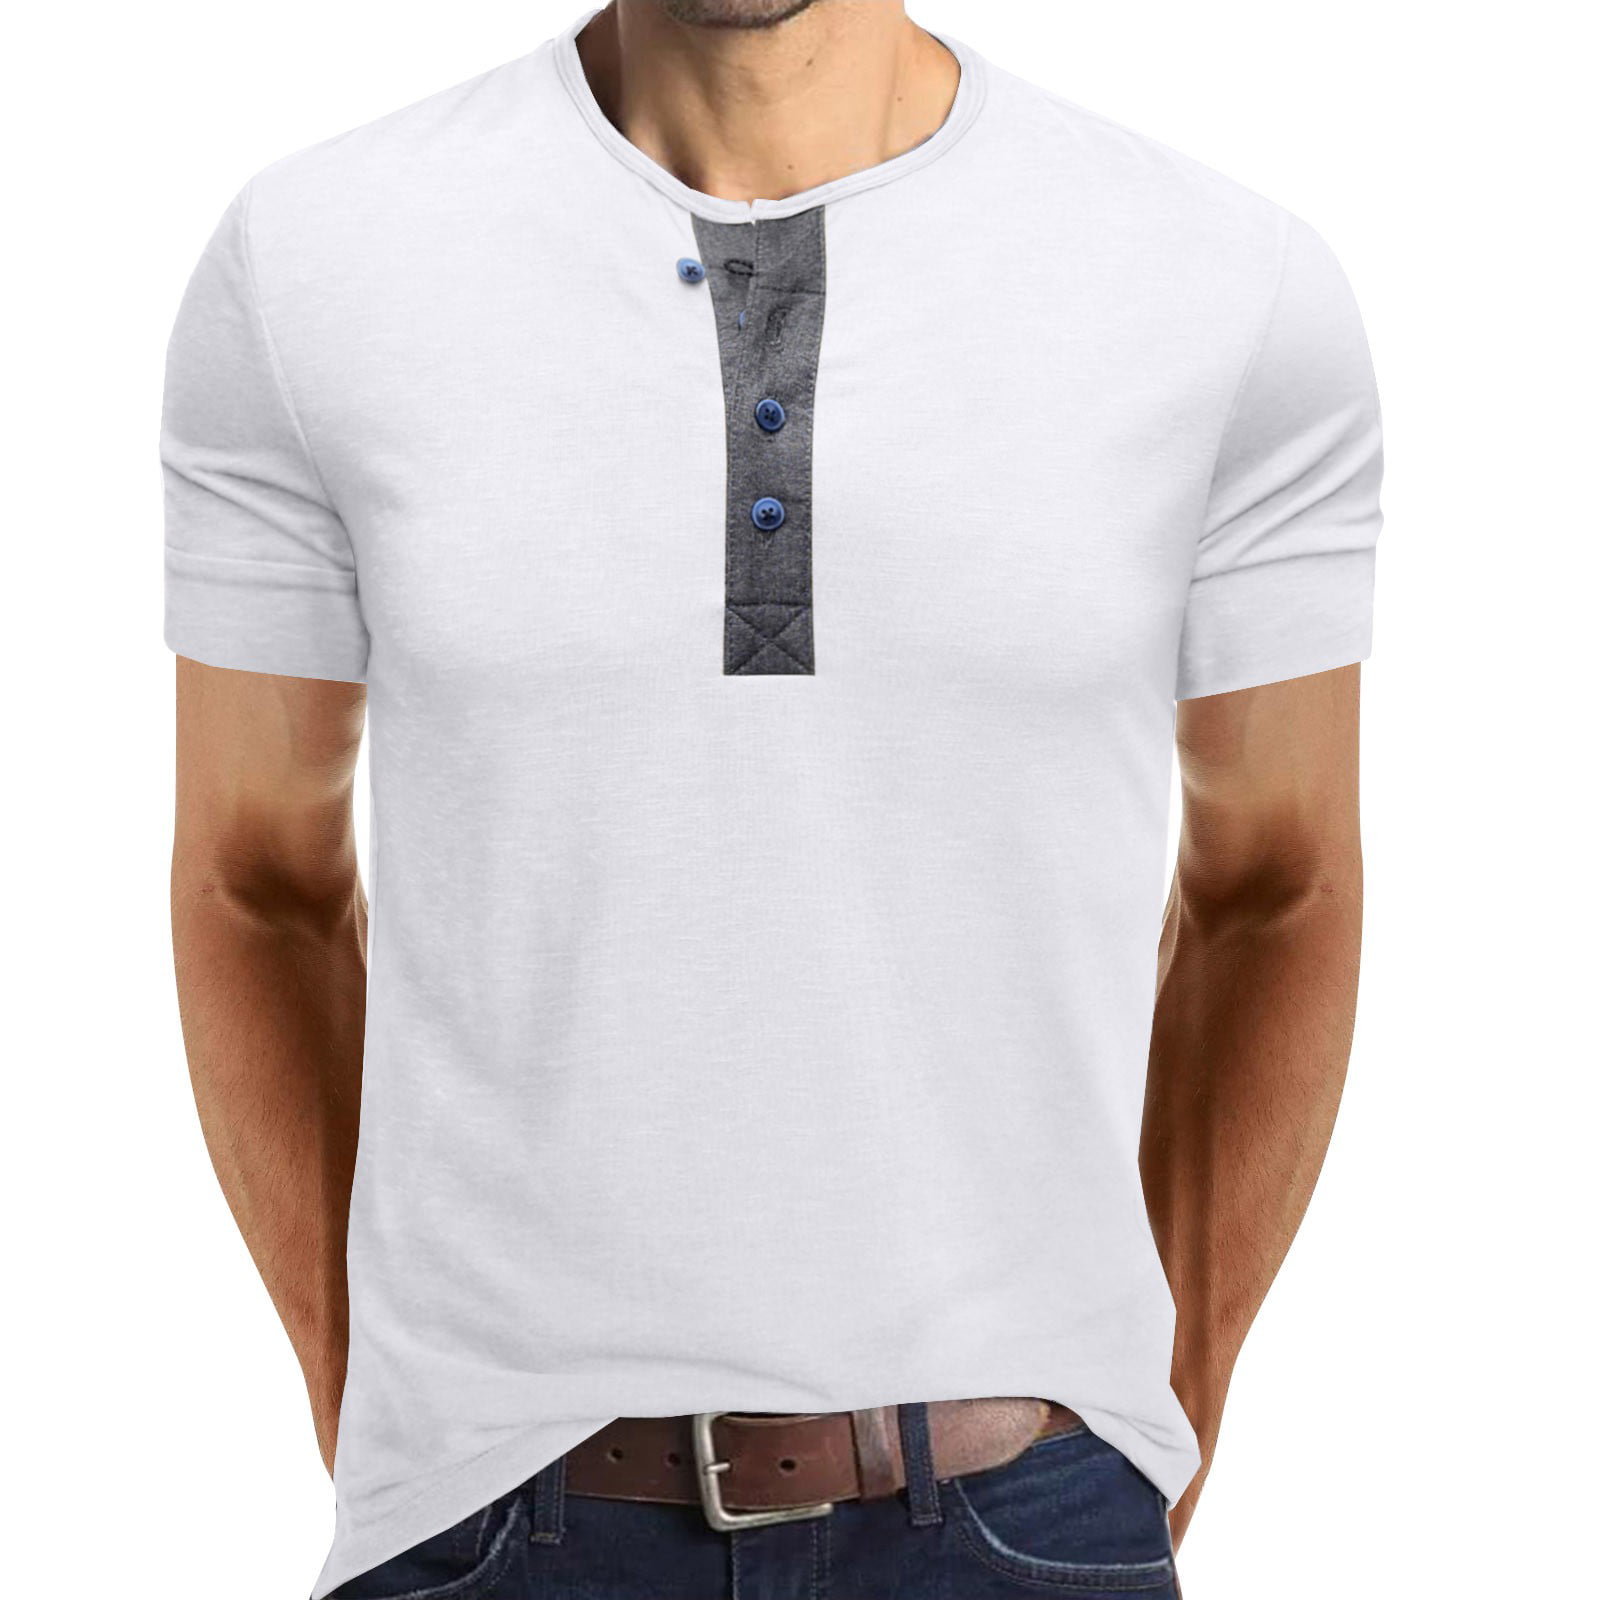 What Are All The Different T-Shirt Styles?